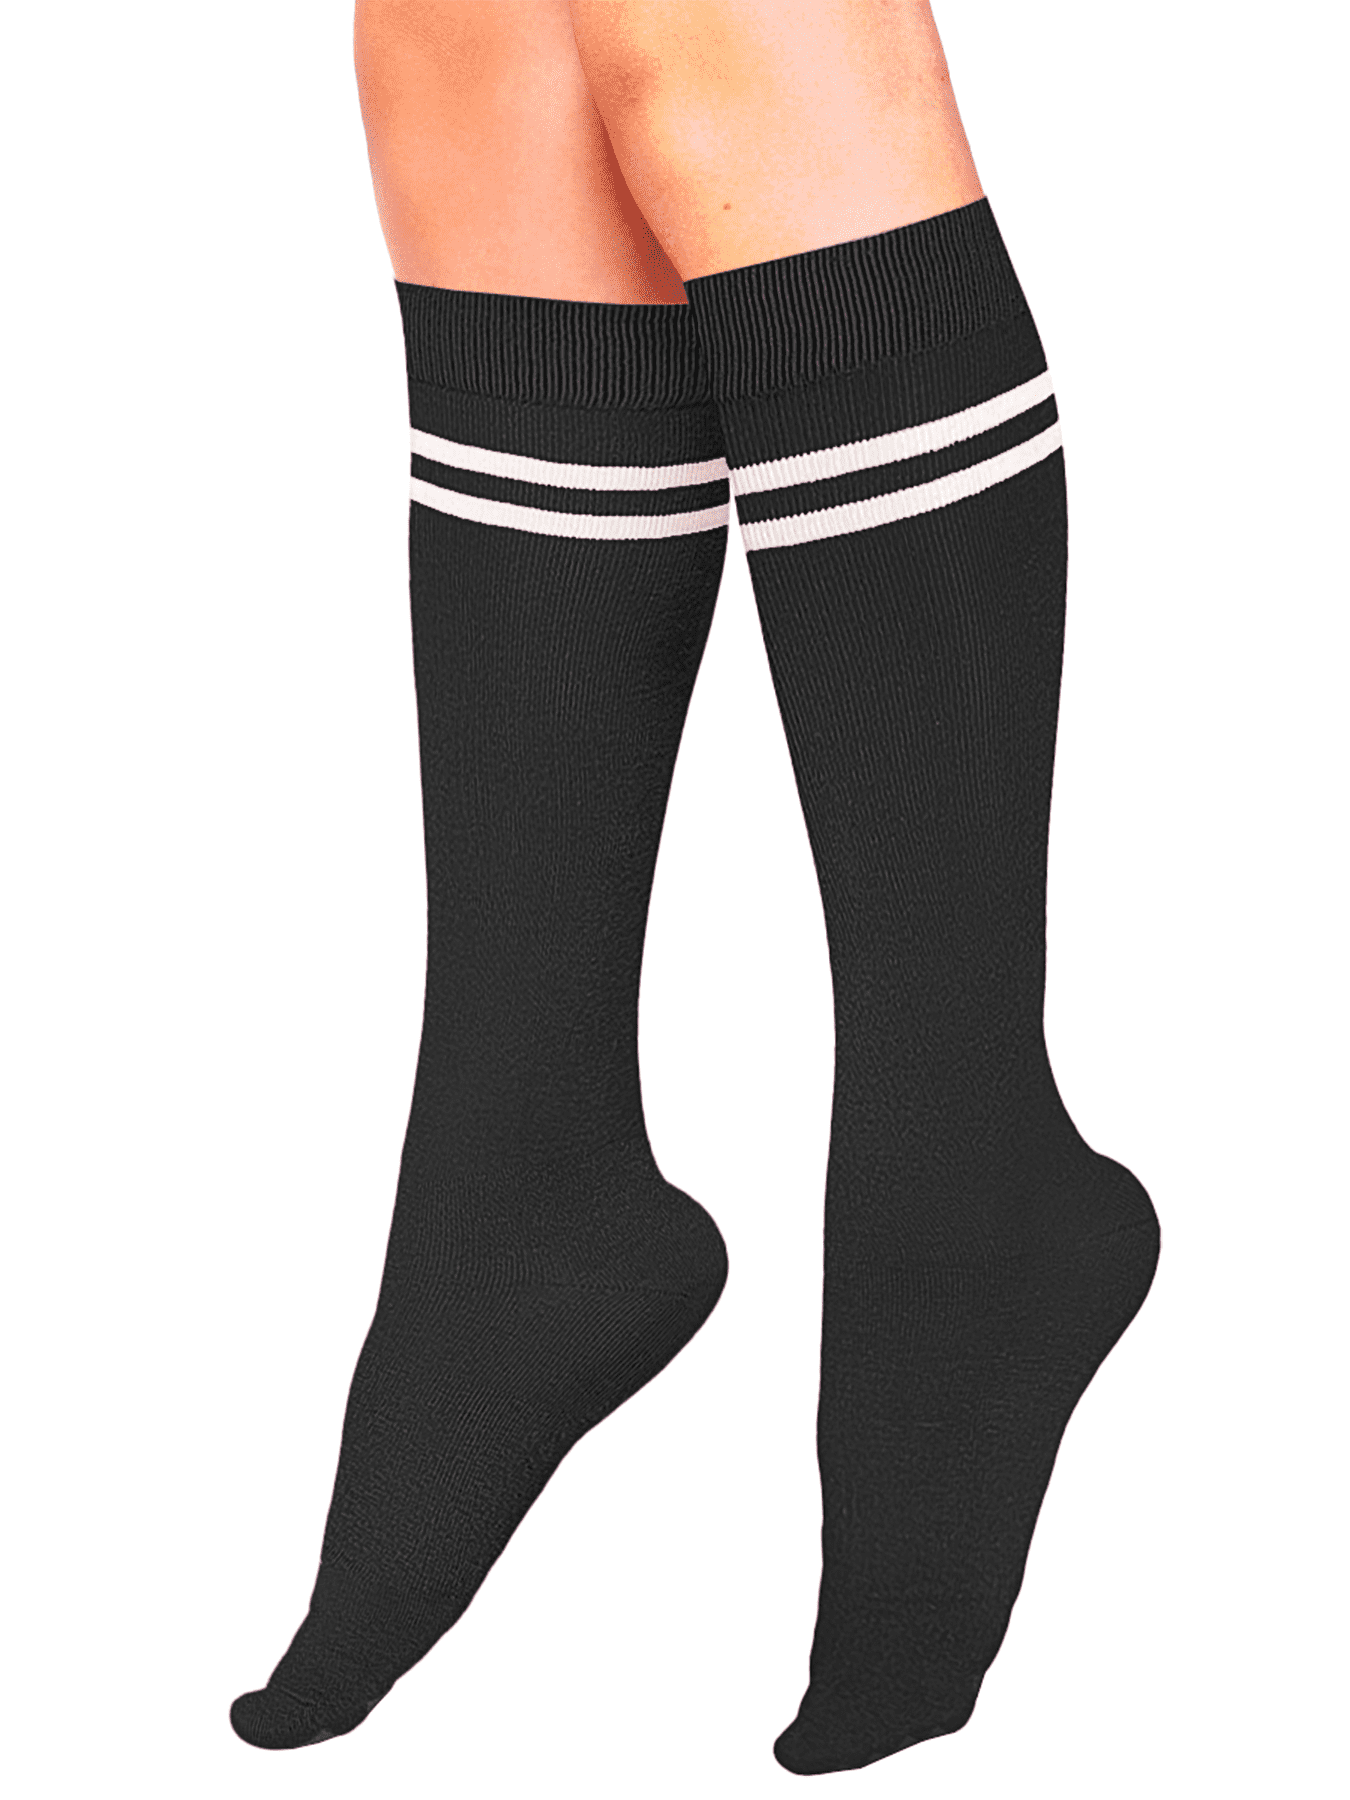 Standard Knee High Socks with White Stripes Sports Costume Party